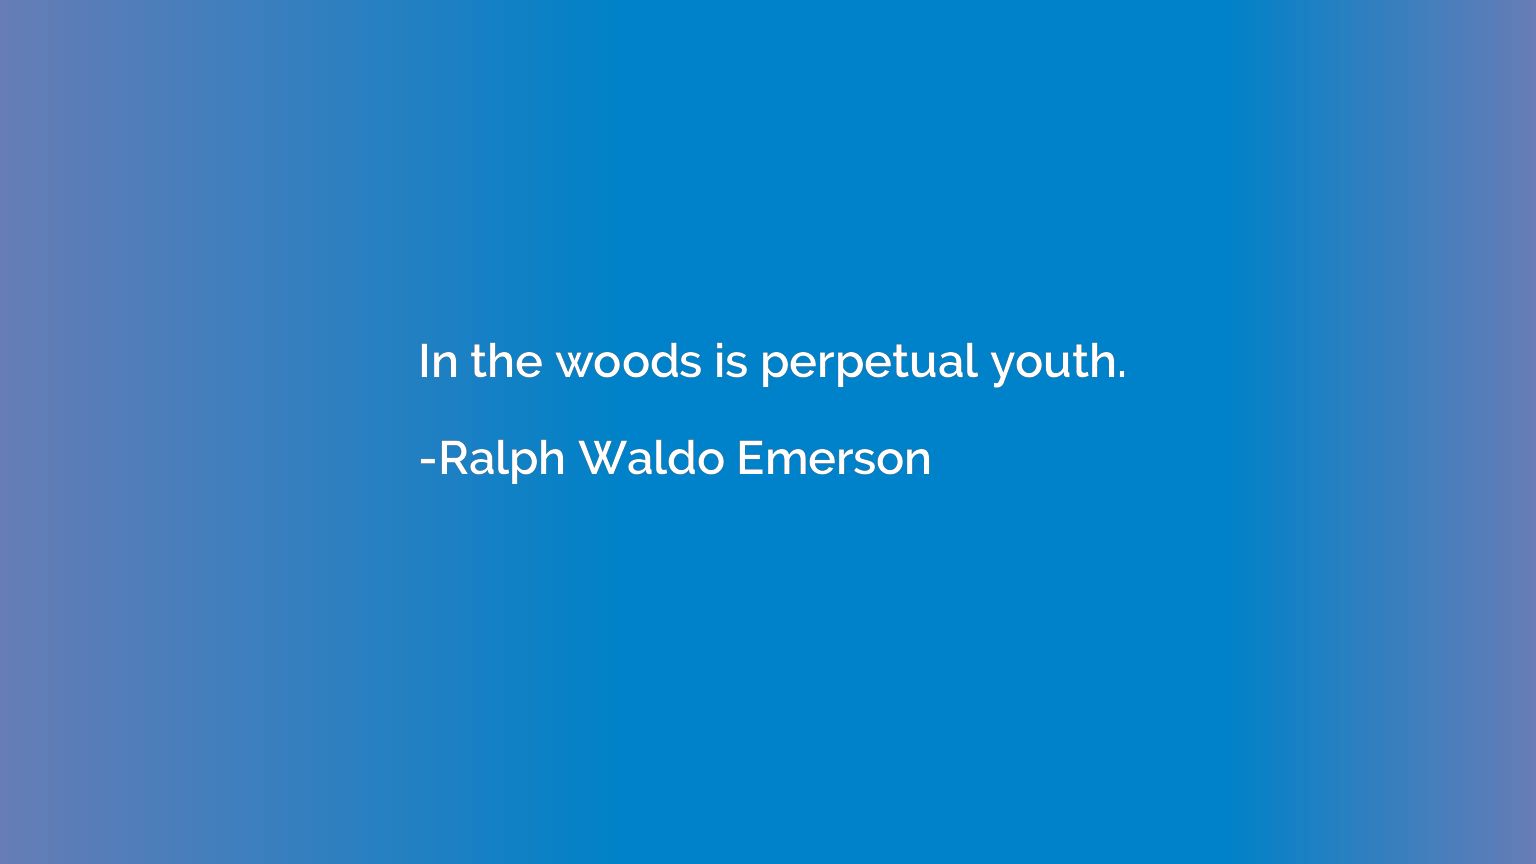 In the woods is perpetual youth.